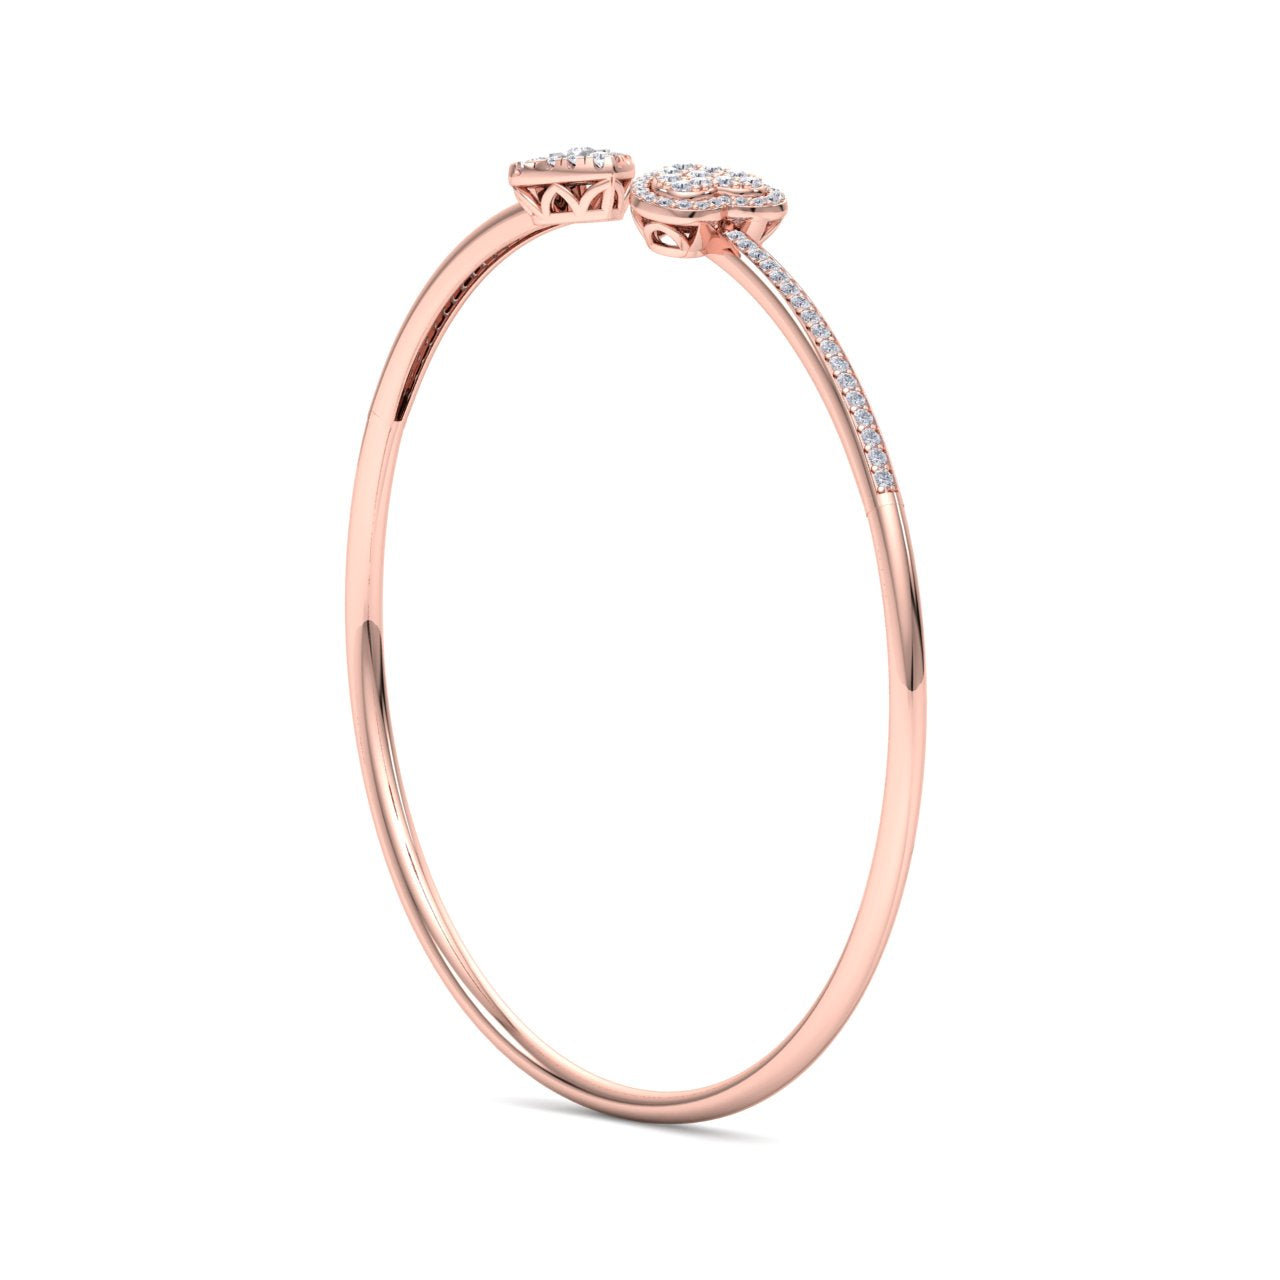 Beautiful Bracelet in rose gold with white diamonds of 0.56 ct in weight